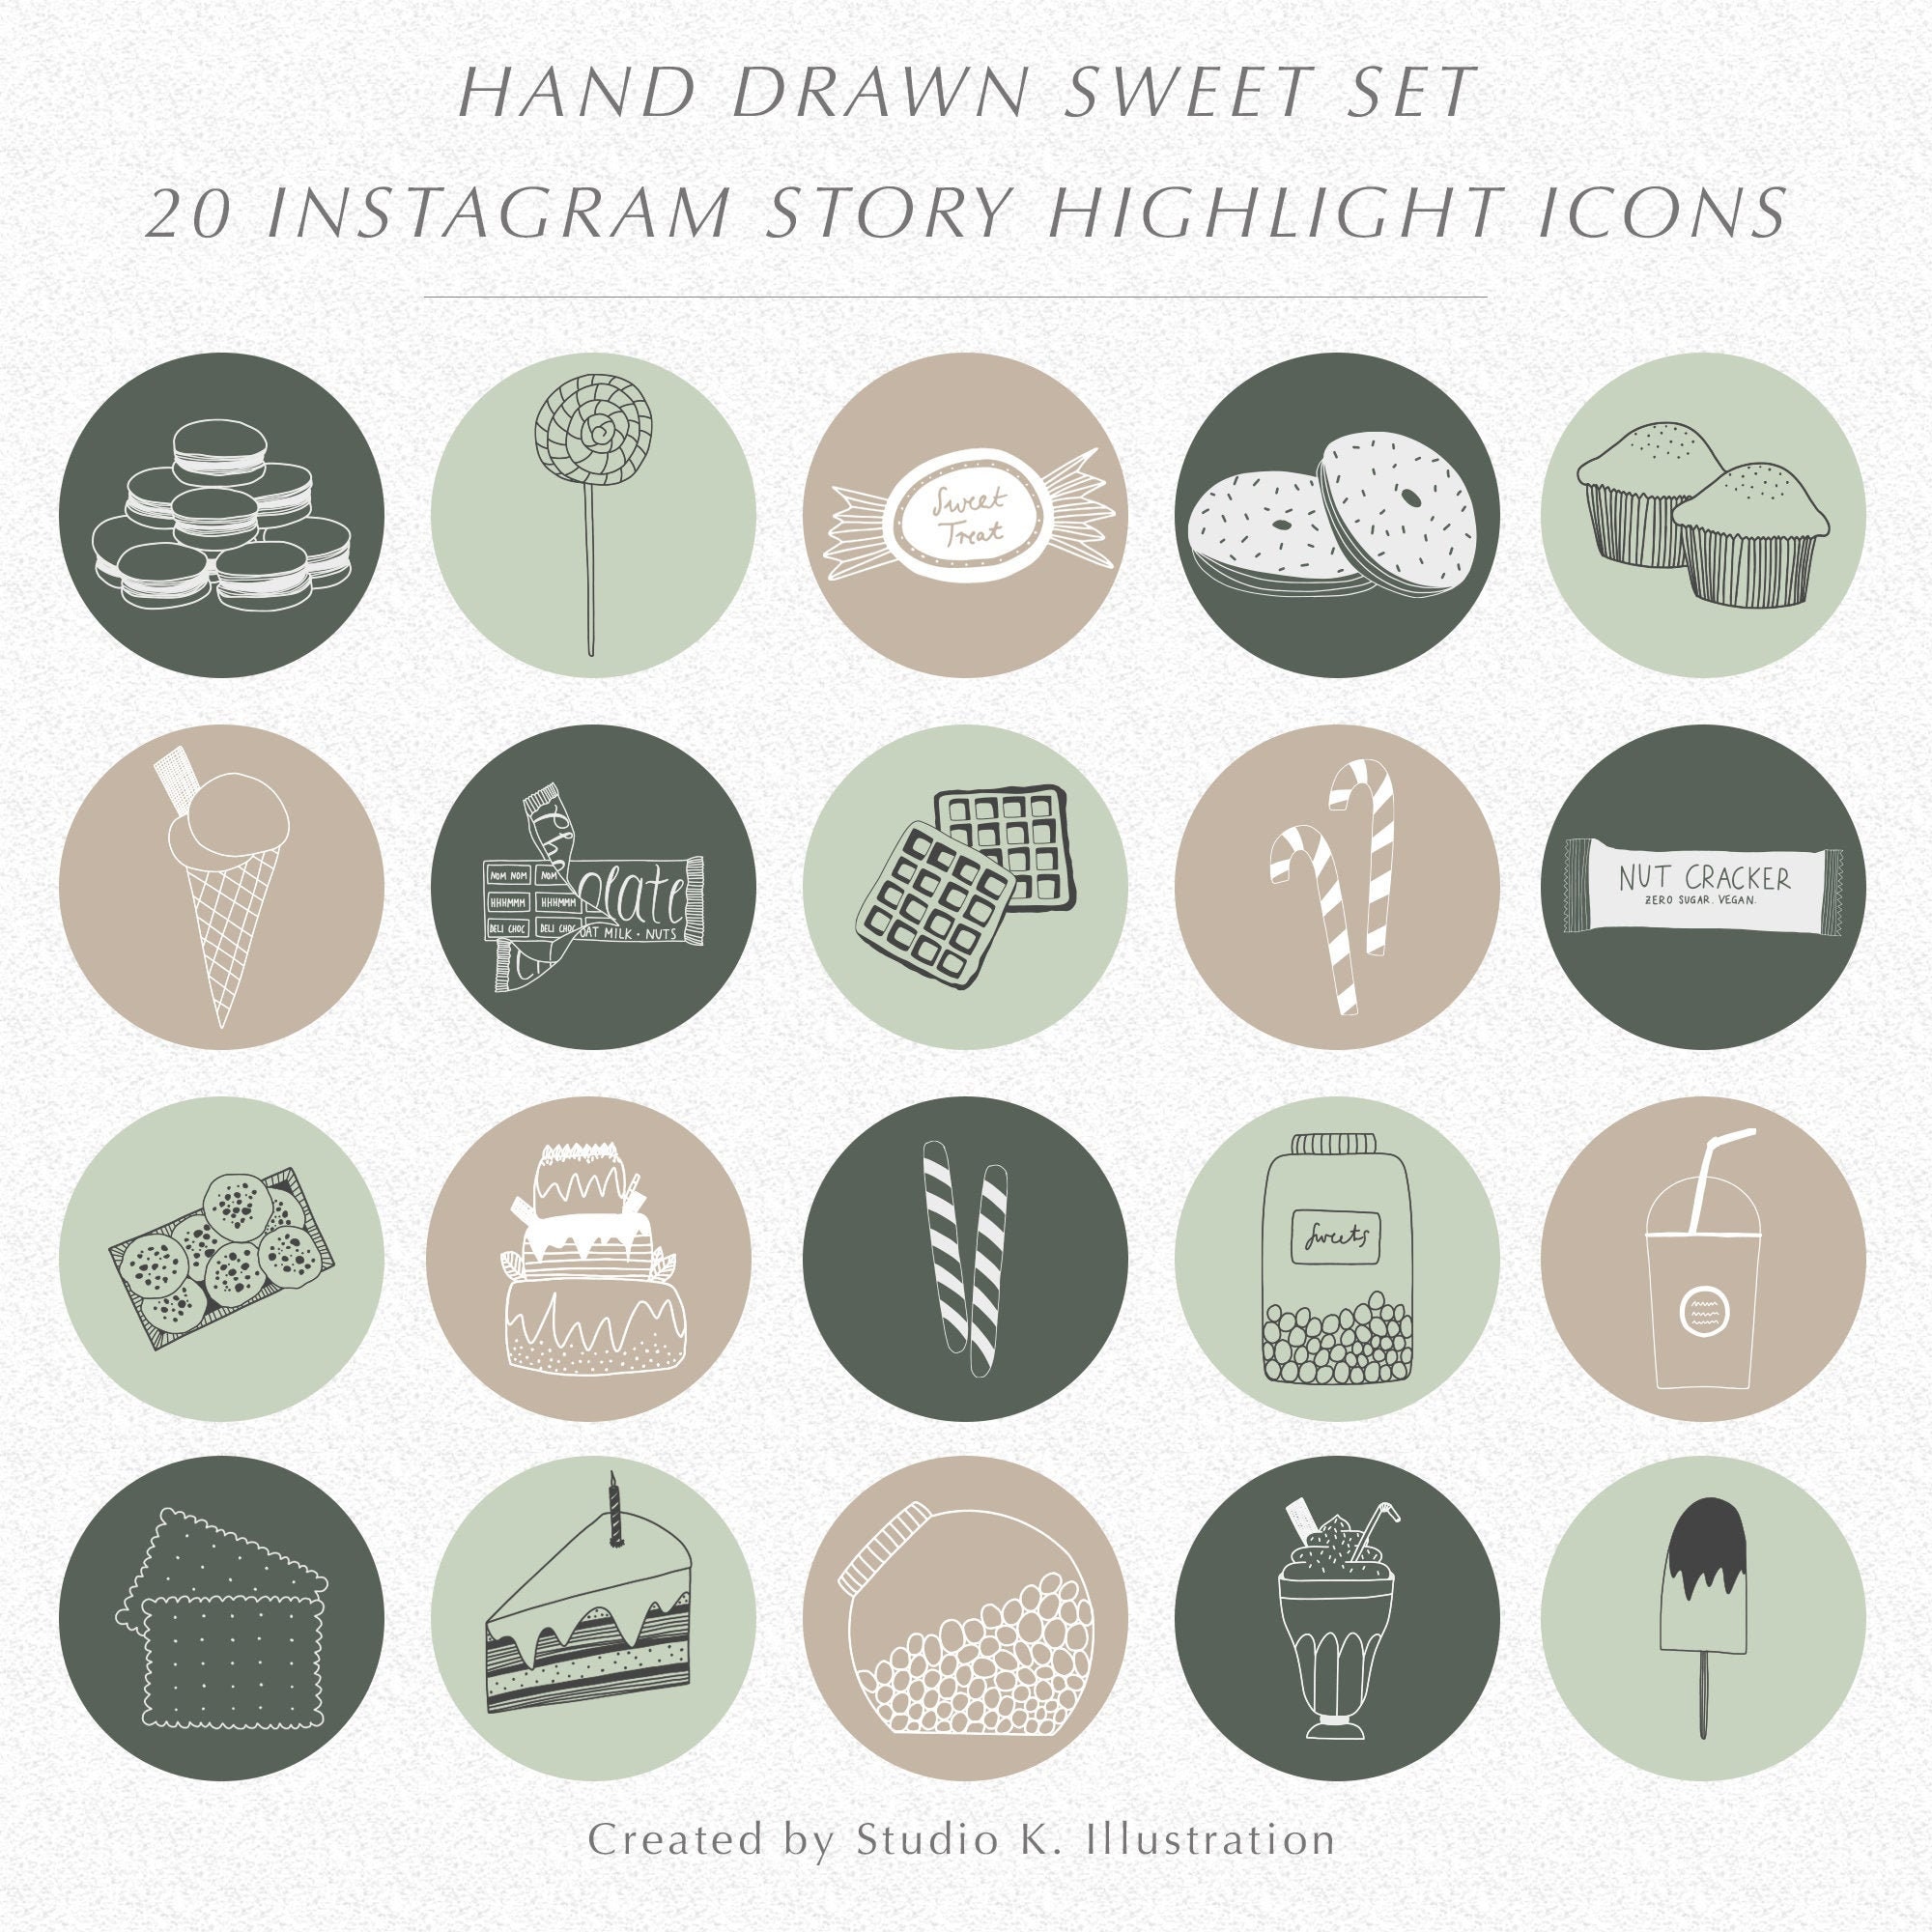 12 Candy Instagram Story Highlight Icons Hand-drawn Sweets Set - Etsy